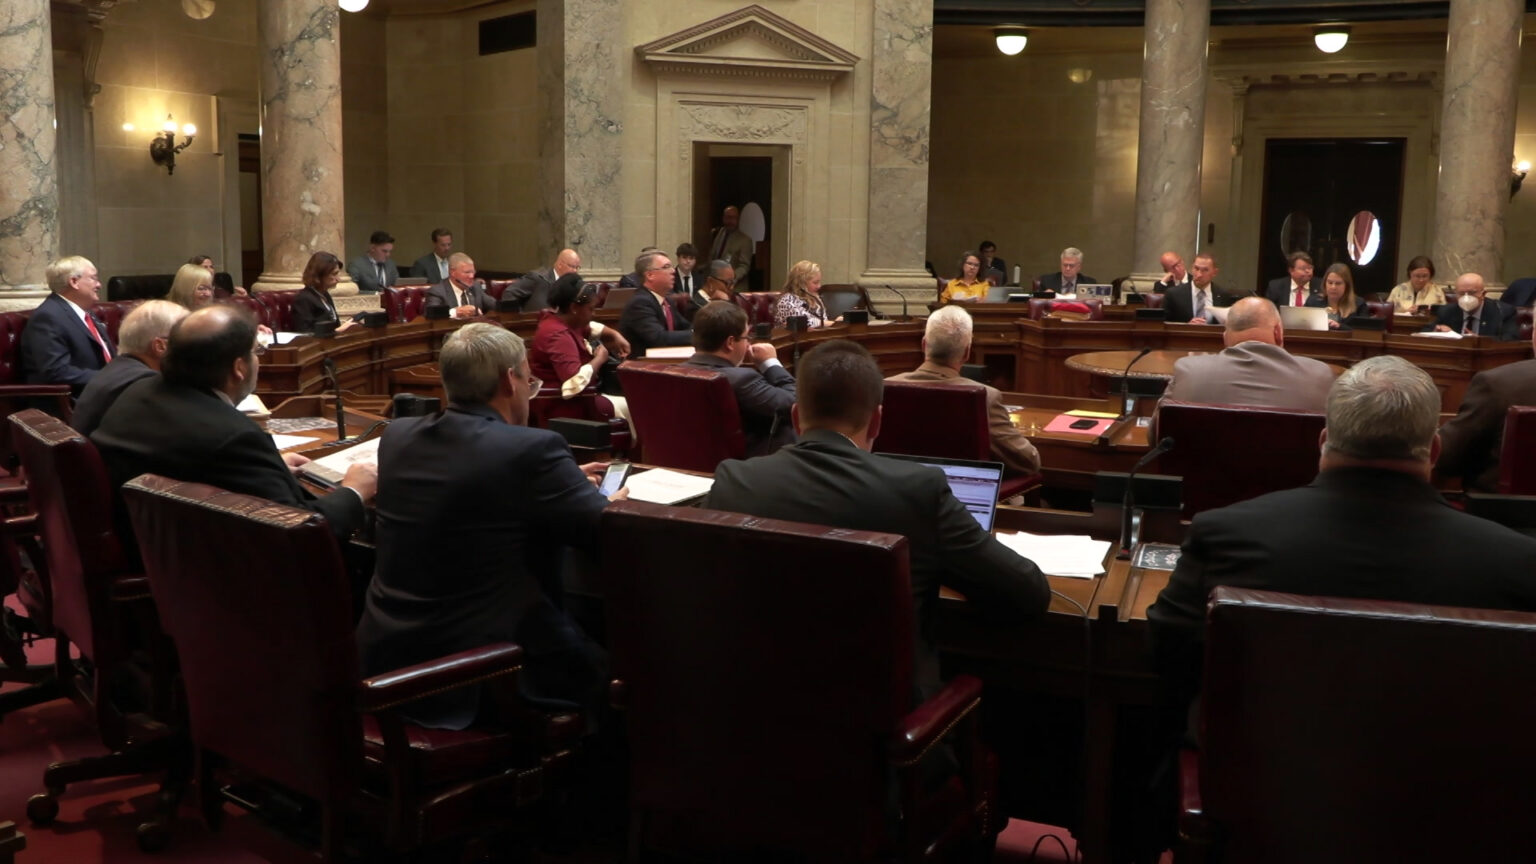 State senators sit at wood desks arranged in a semi-circle in a room with marble masonry and pillars.